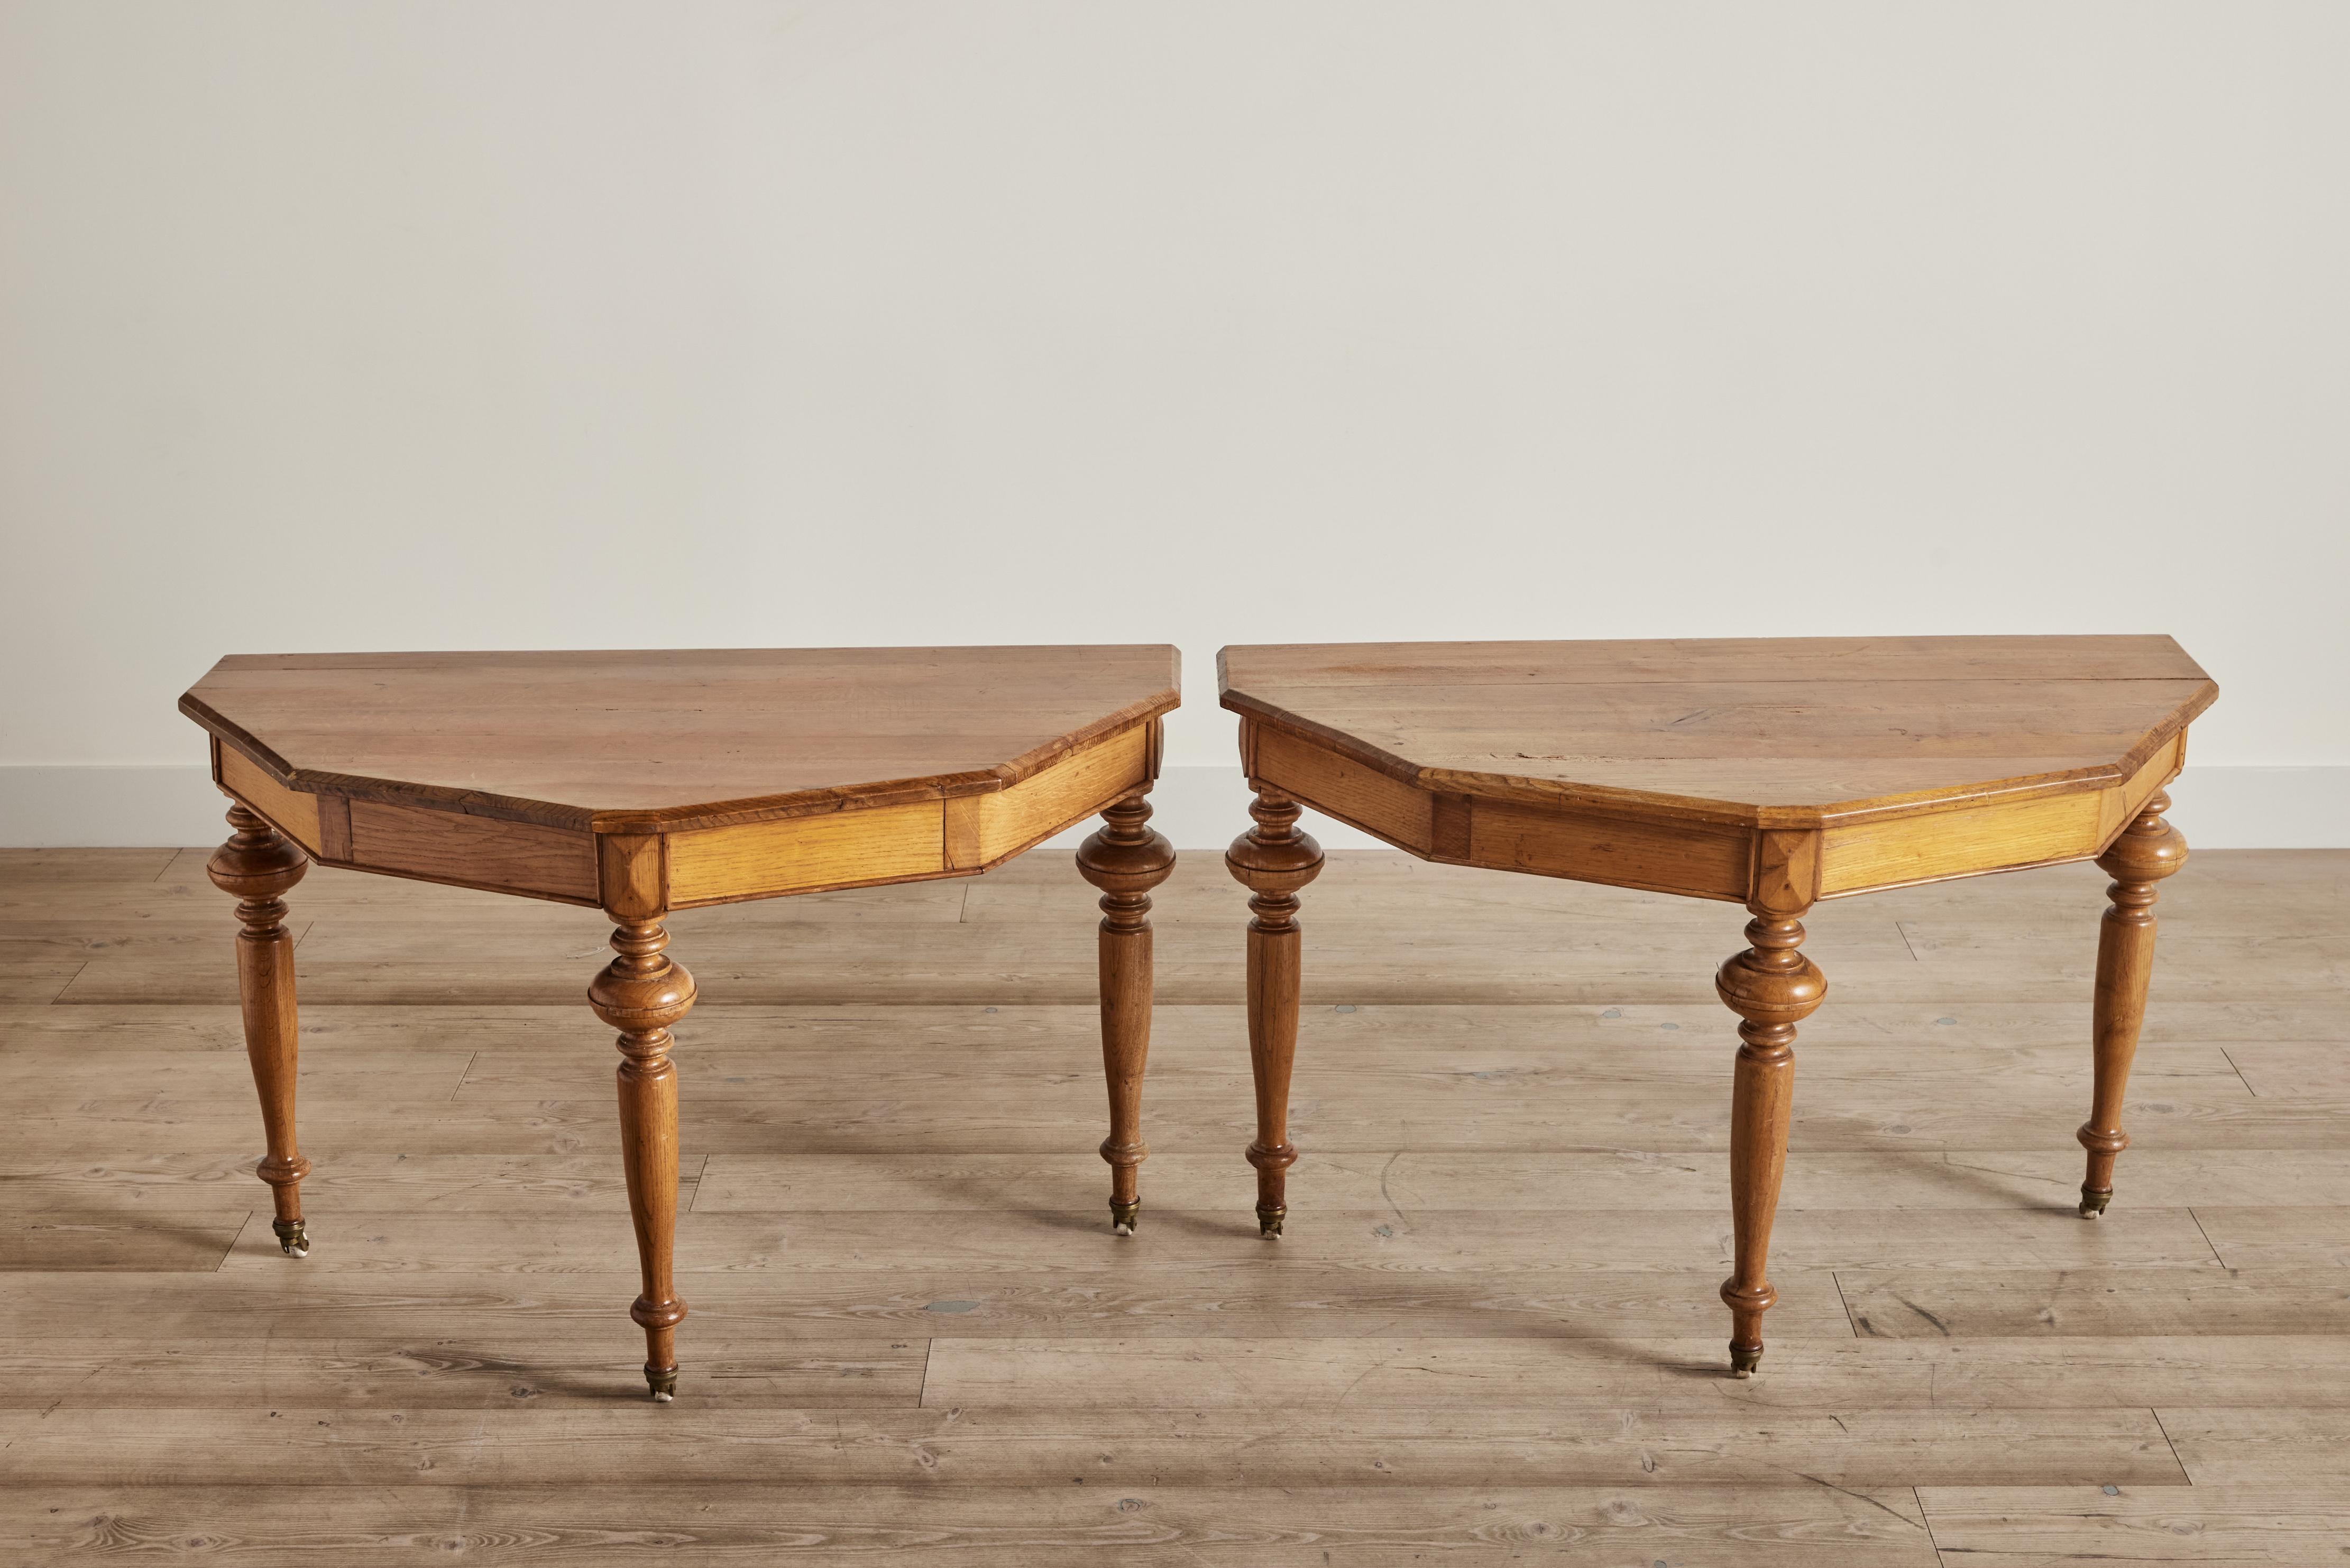 Pair of 19th century Swedish demilune tables showcasing the simplicity and elegance of Swedish style with graceful silhouettes and a rich wood finish. These tables can be used separately or joined as one table to offer versatile functionality while